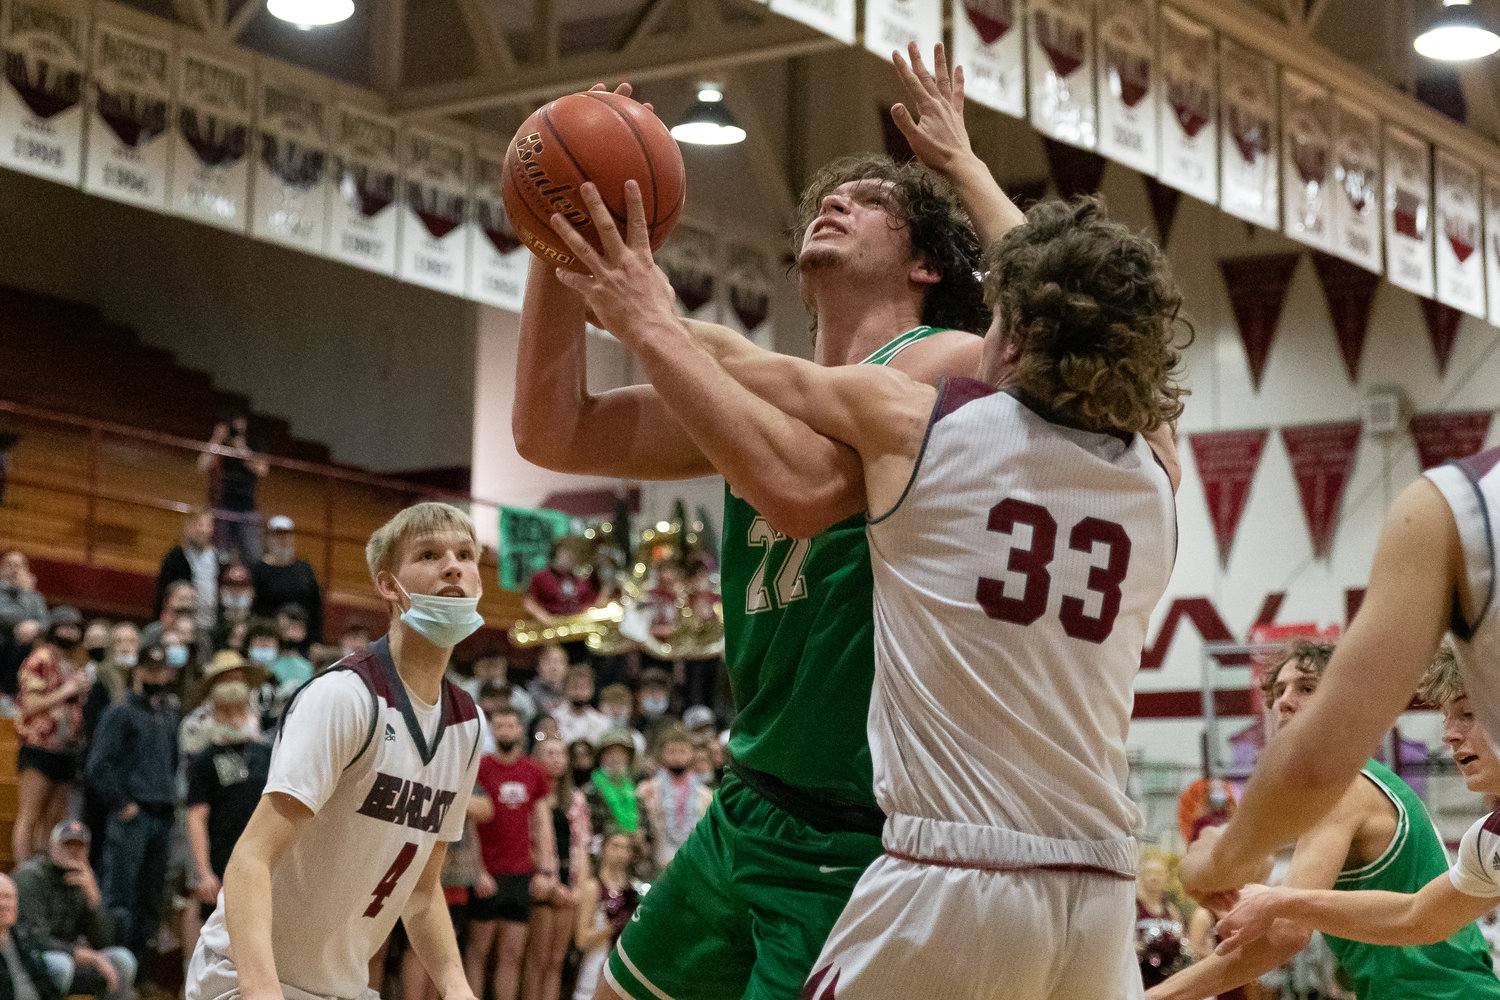 Tumwater forward Ryan Otton is fouled on a layup attempt against W.F. West Jan. 25.